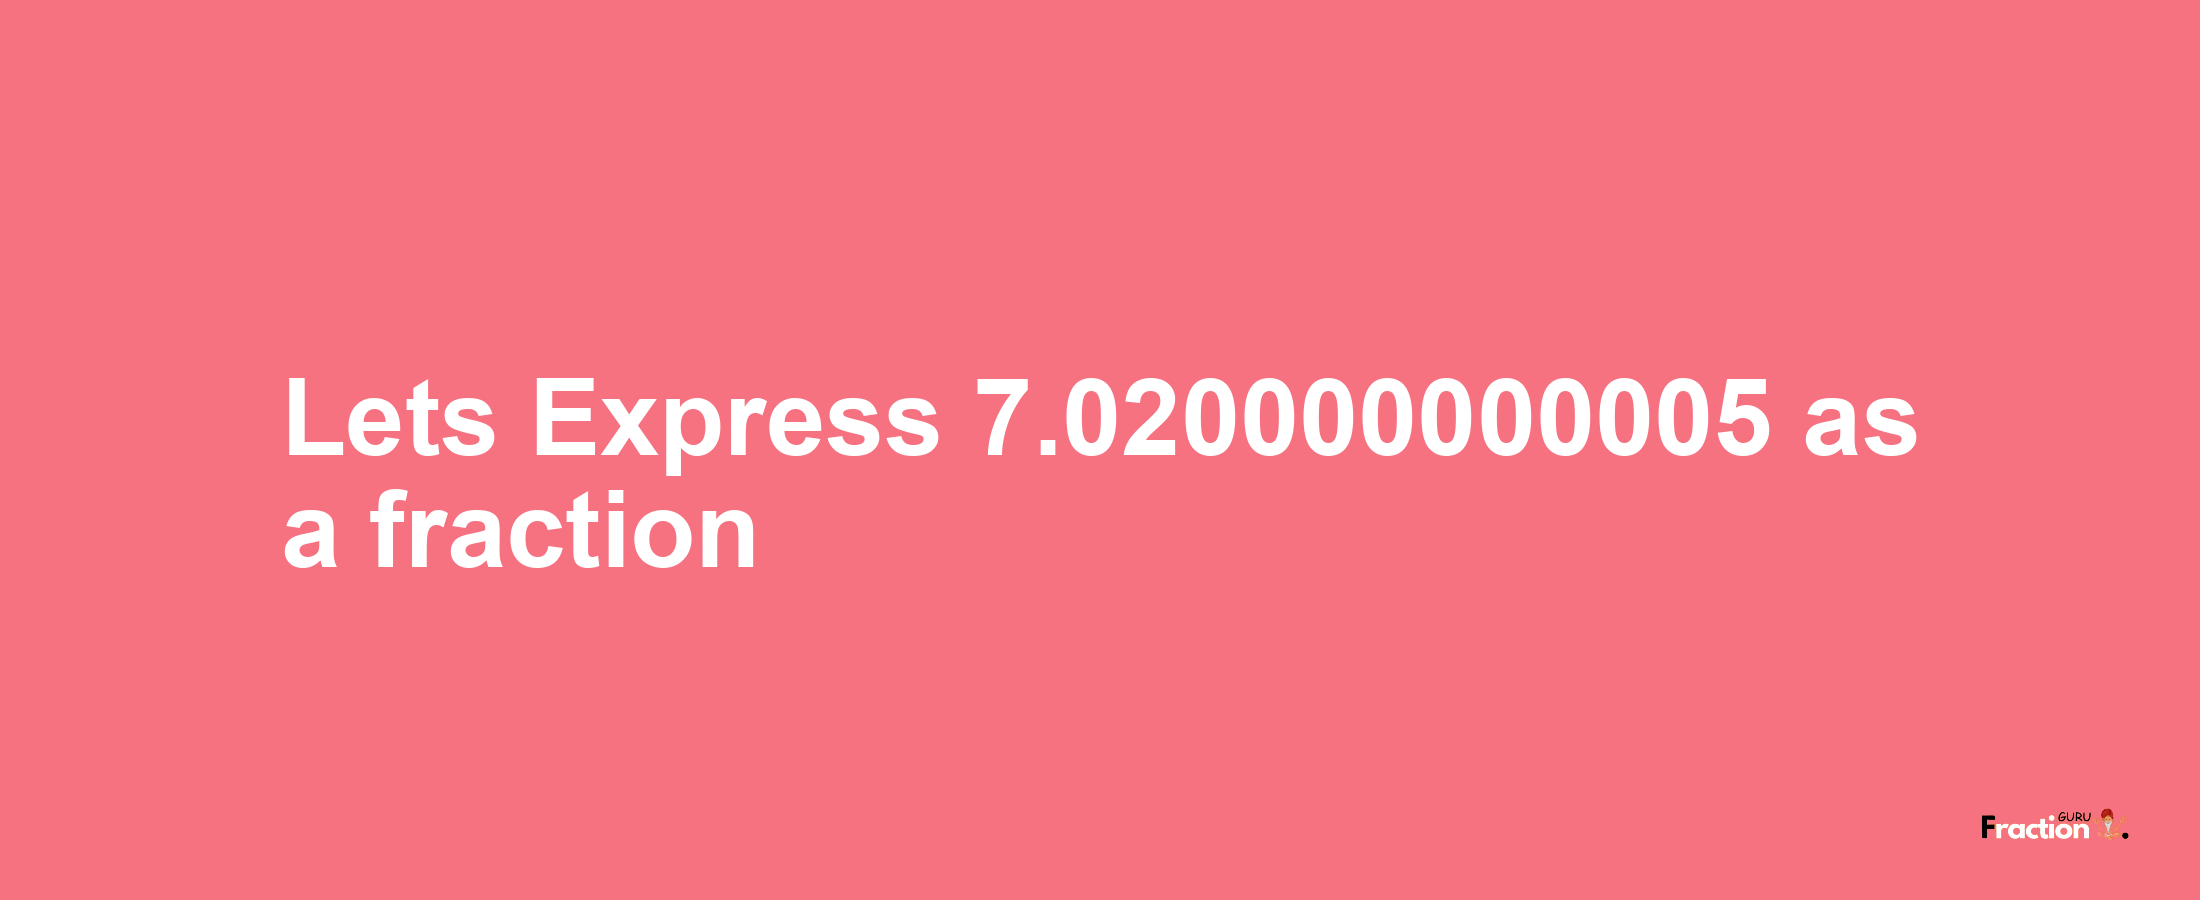 Lets Express 7.020000000005 as afraction